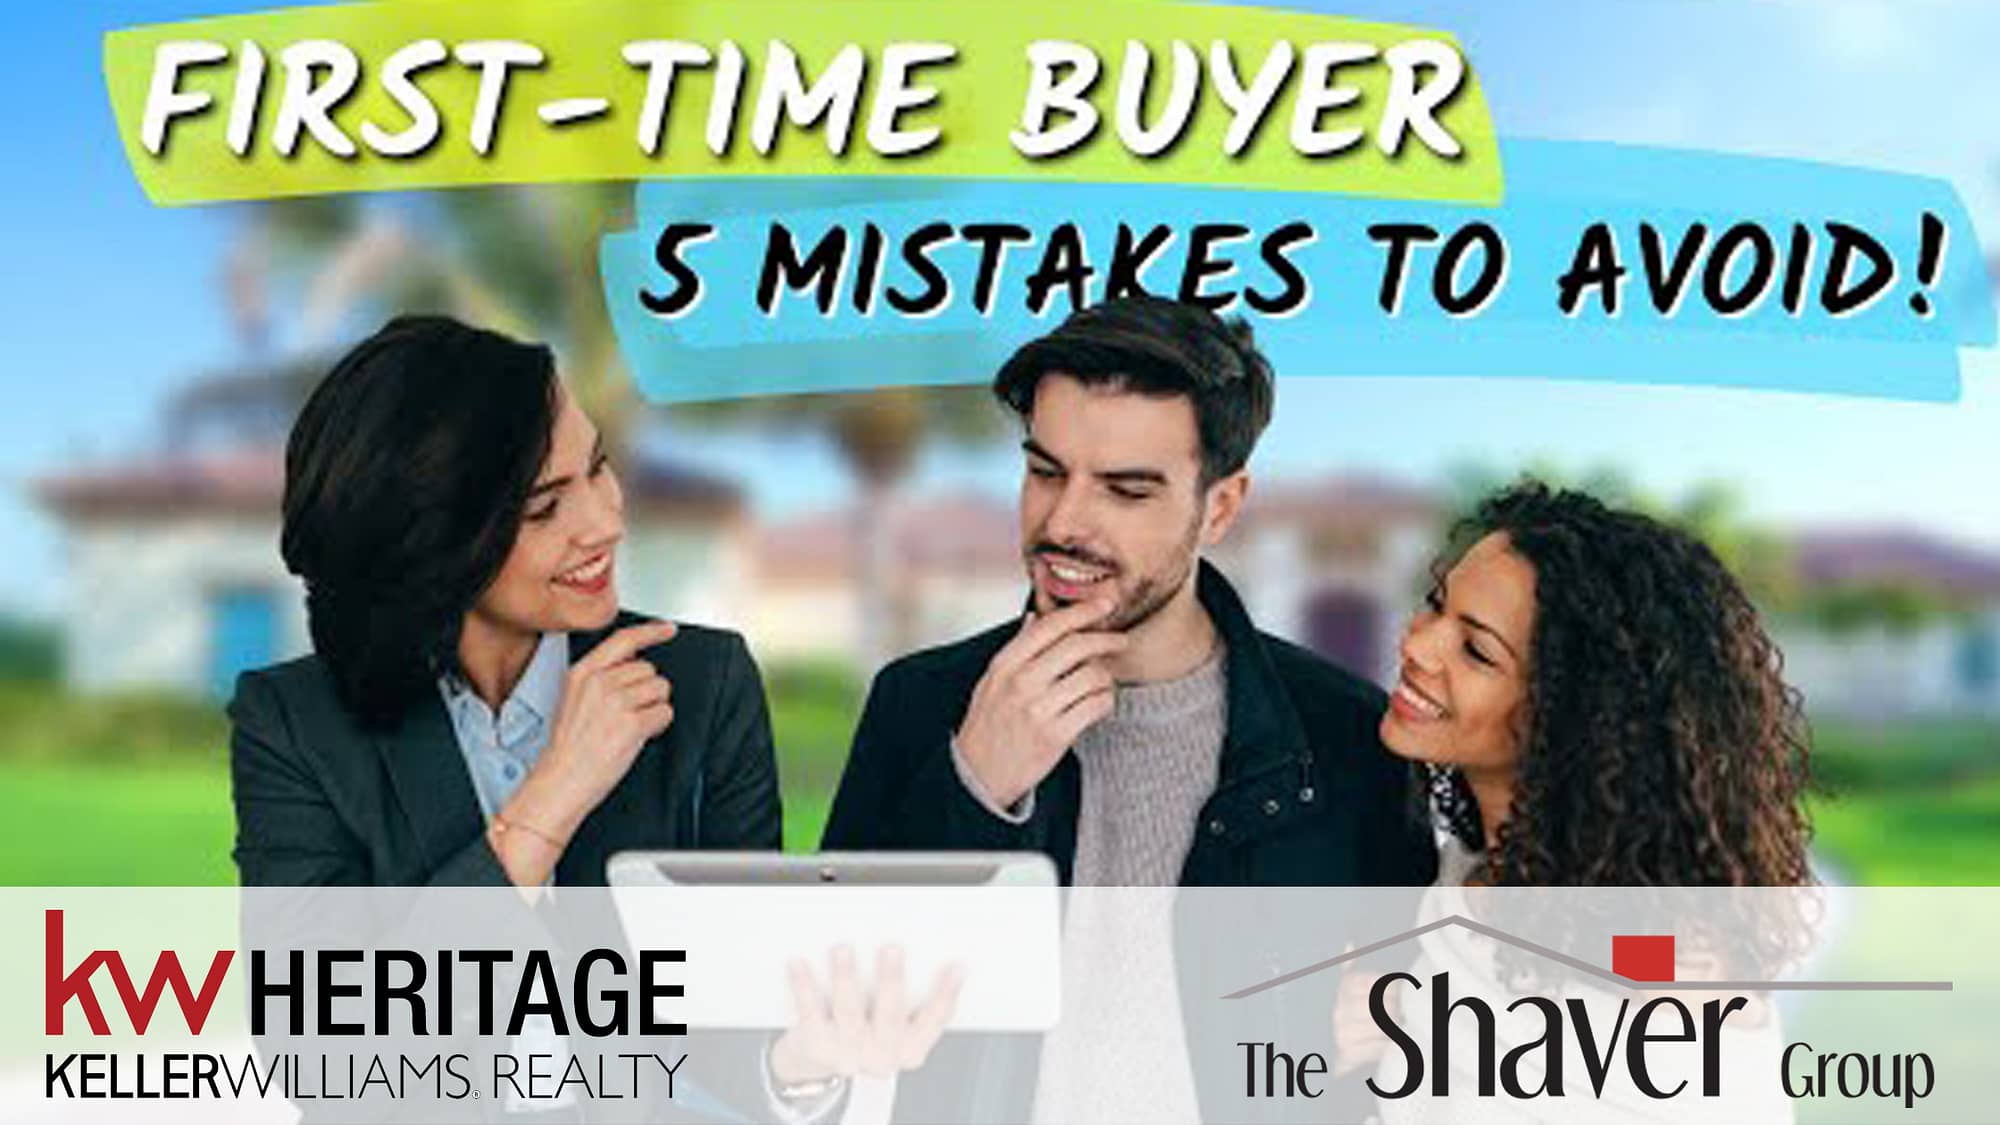 first-time buyer 5 mistakes to avoid